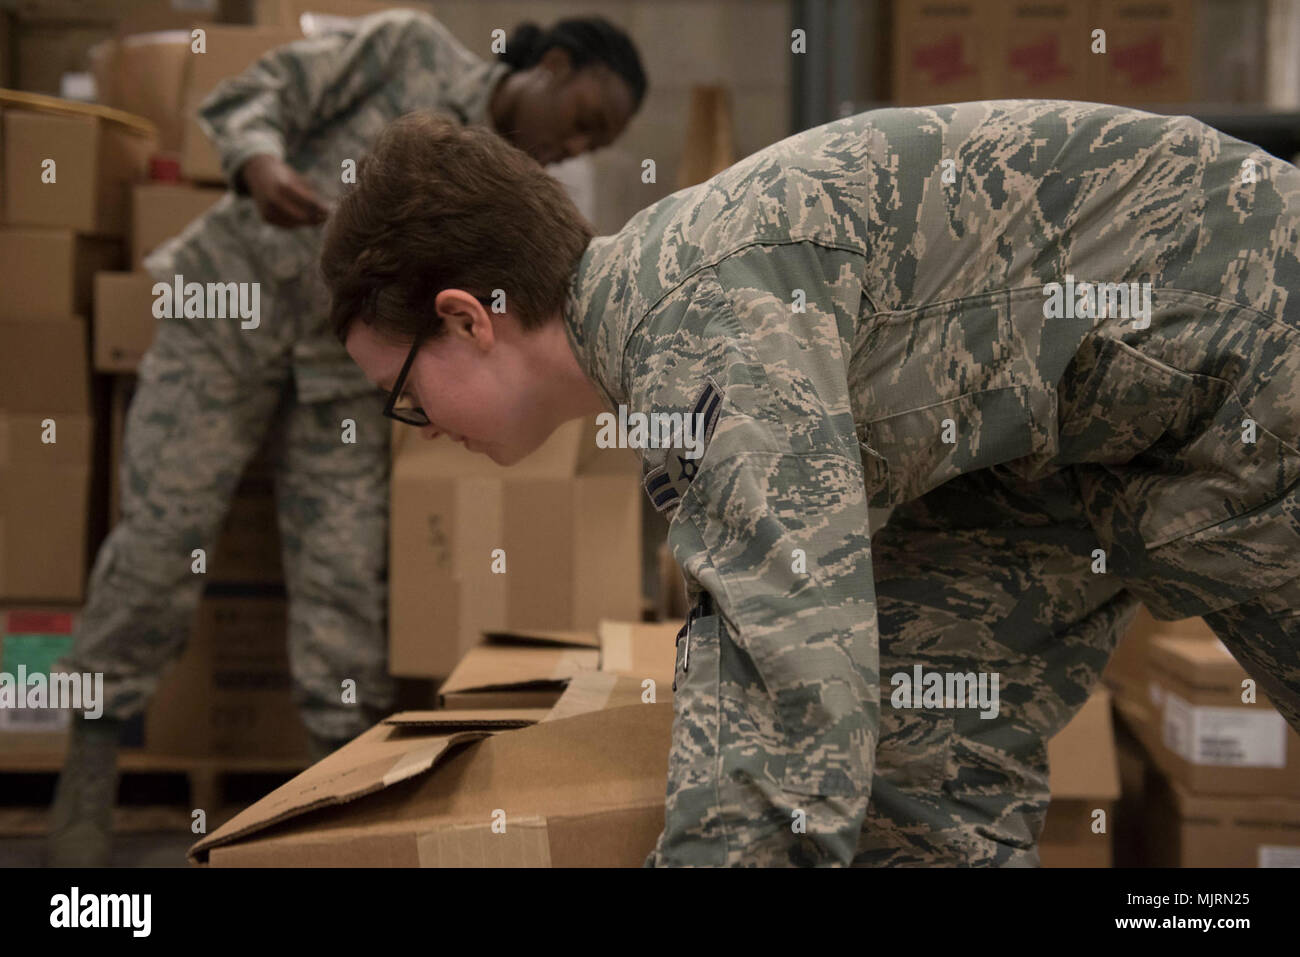 U.S. Air Force Airman 1st Class’ Ashley Cromwell, left, and Gabrielle McDowell, right, both 18th Medical Group medical material technicians, stack boxes of medical supplies for palletizing March 21, 2018, at Kadena Air Base, Japan. Many items, such as first-aid kits and medications, must be checked for quality before they can leave the warehouse. Armed Forces and civilians displaying courage bravery dedication commitment and sacrifice Stock Photo